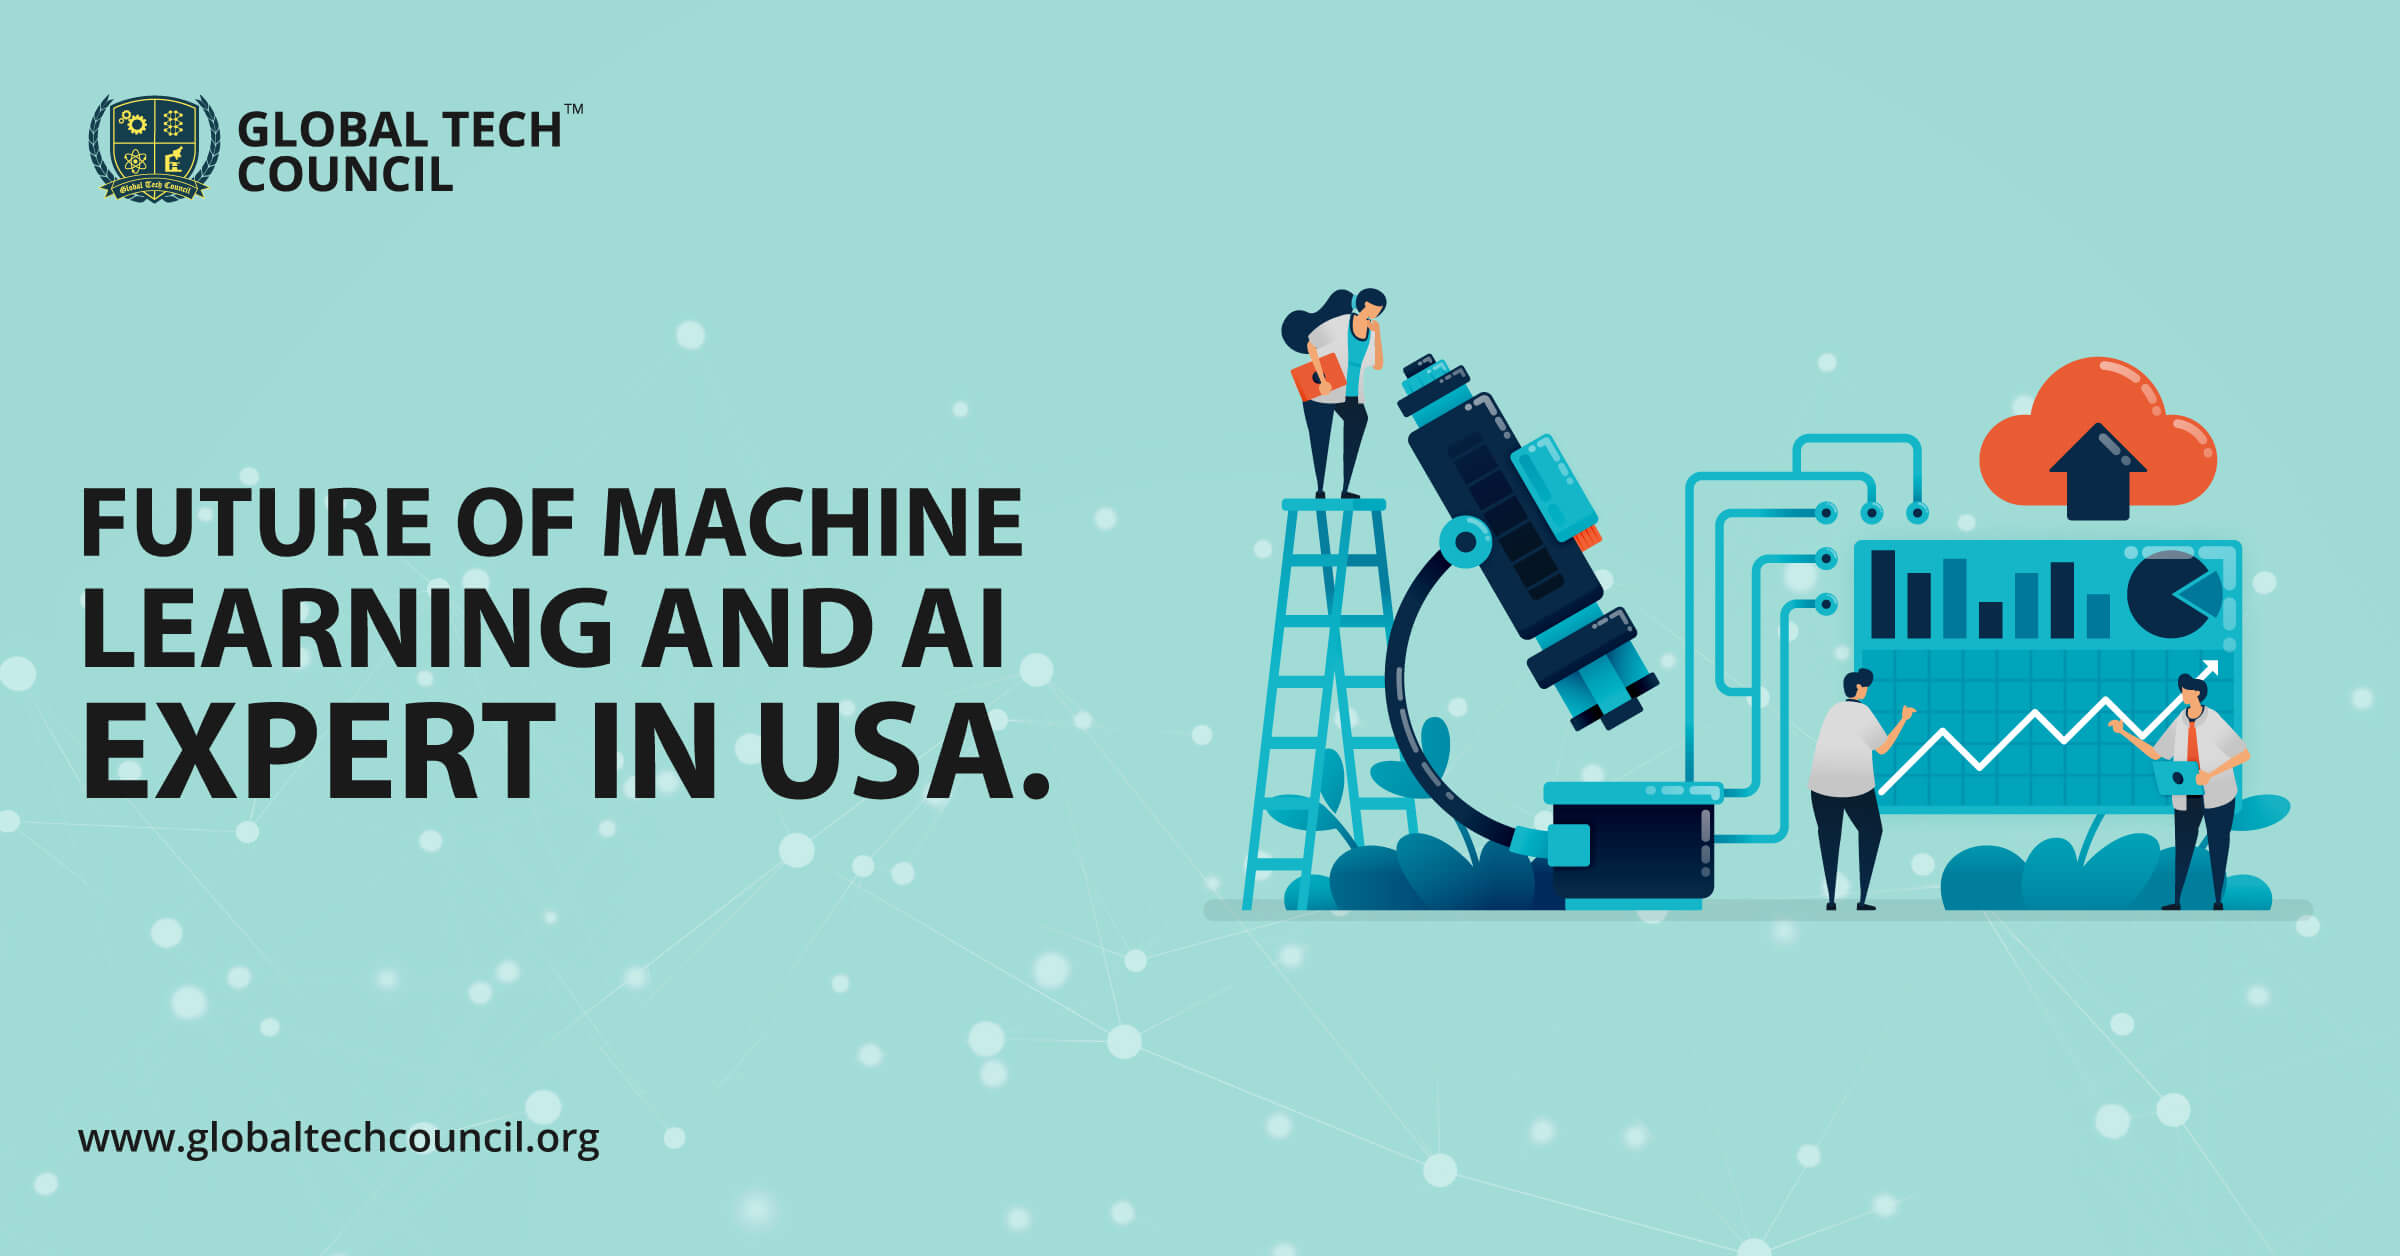 Future-of-machine-learning-expert-and-ai-in-usa